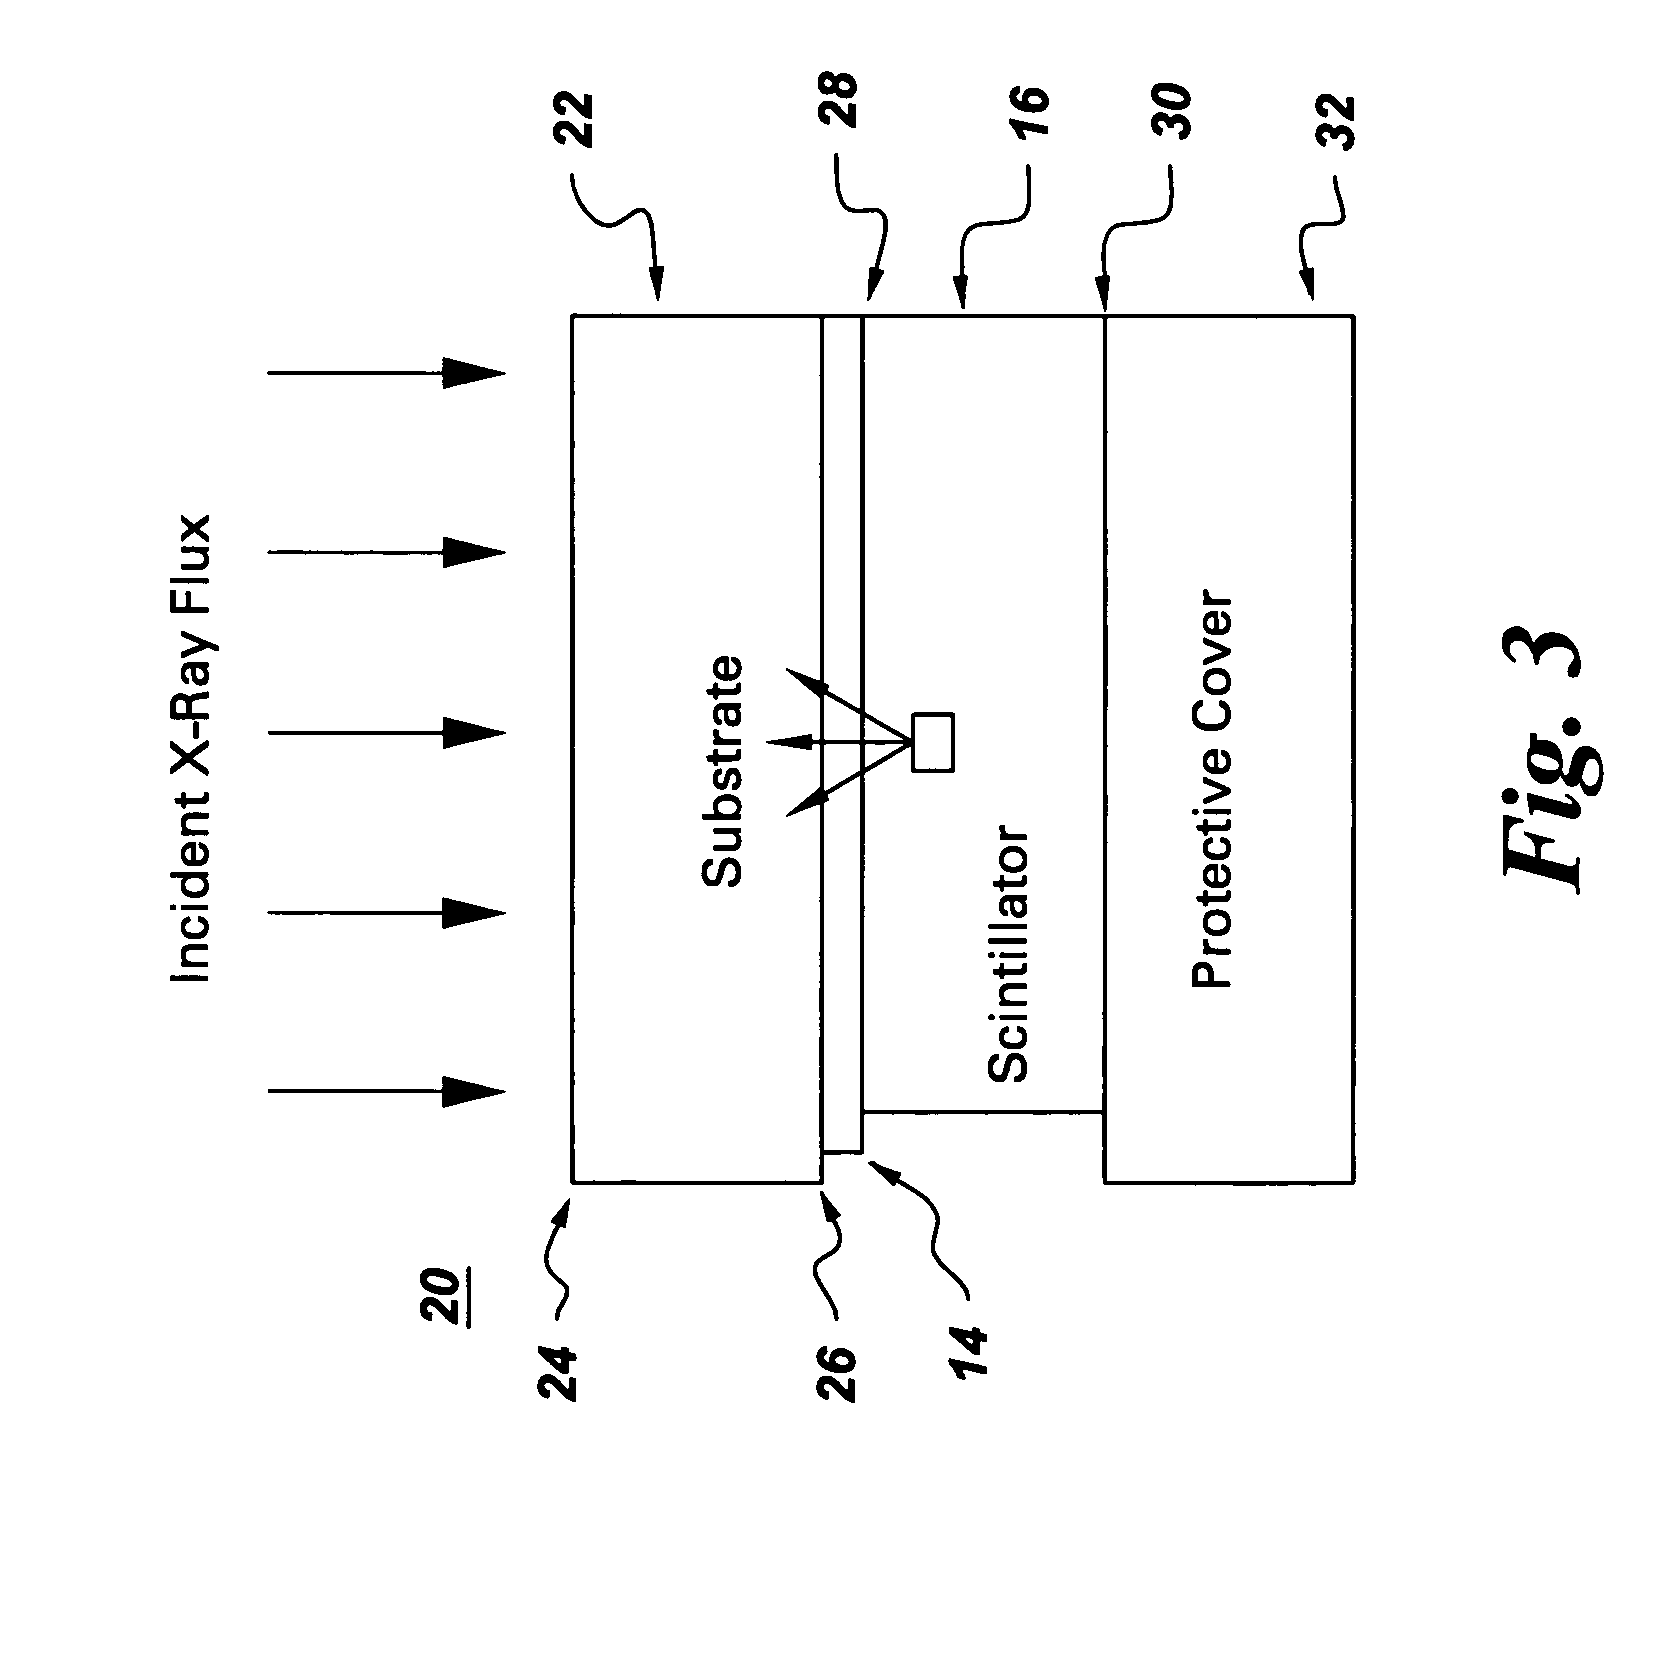 Solid-state radiation imager with back-side irradiation